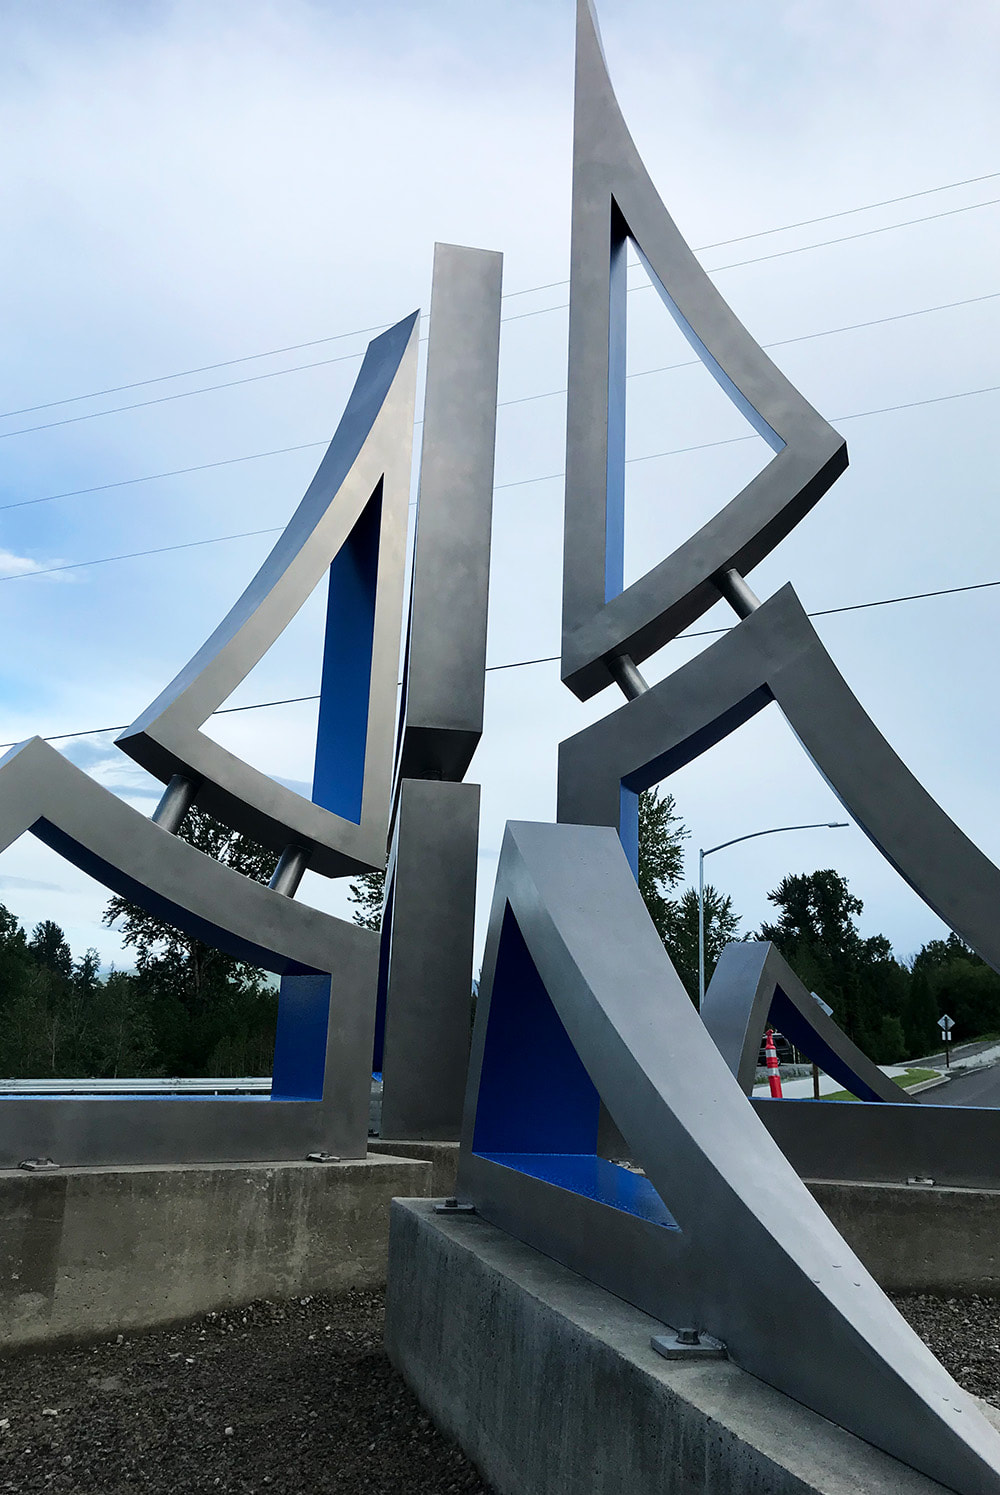 angled photo of a roundabout sculpture that is in the shape of a star and mountain